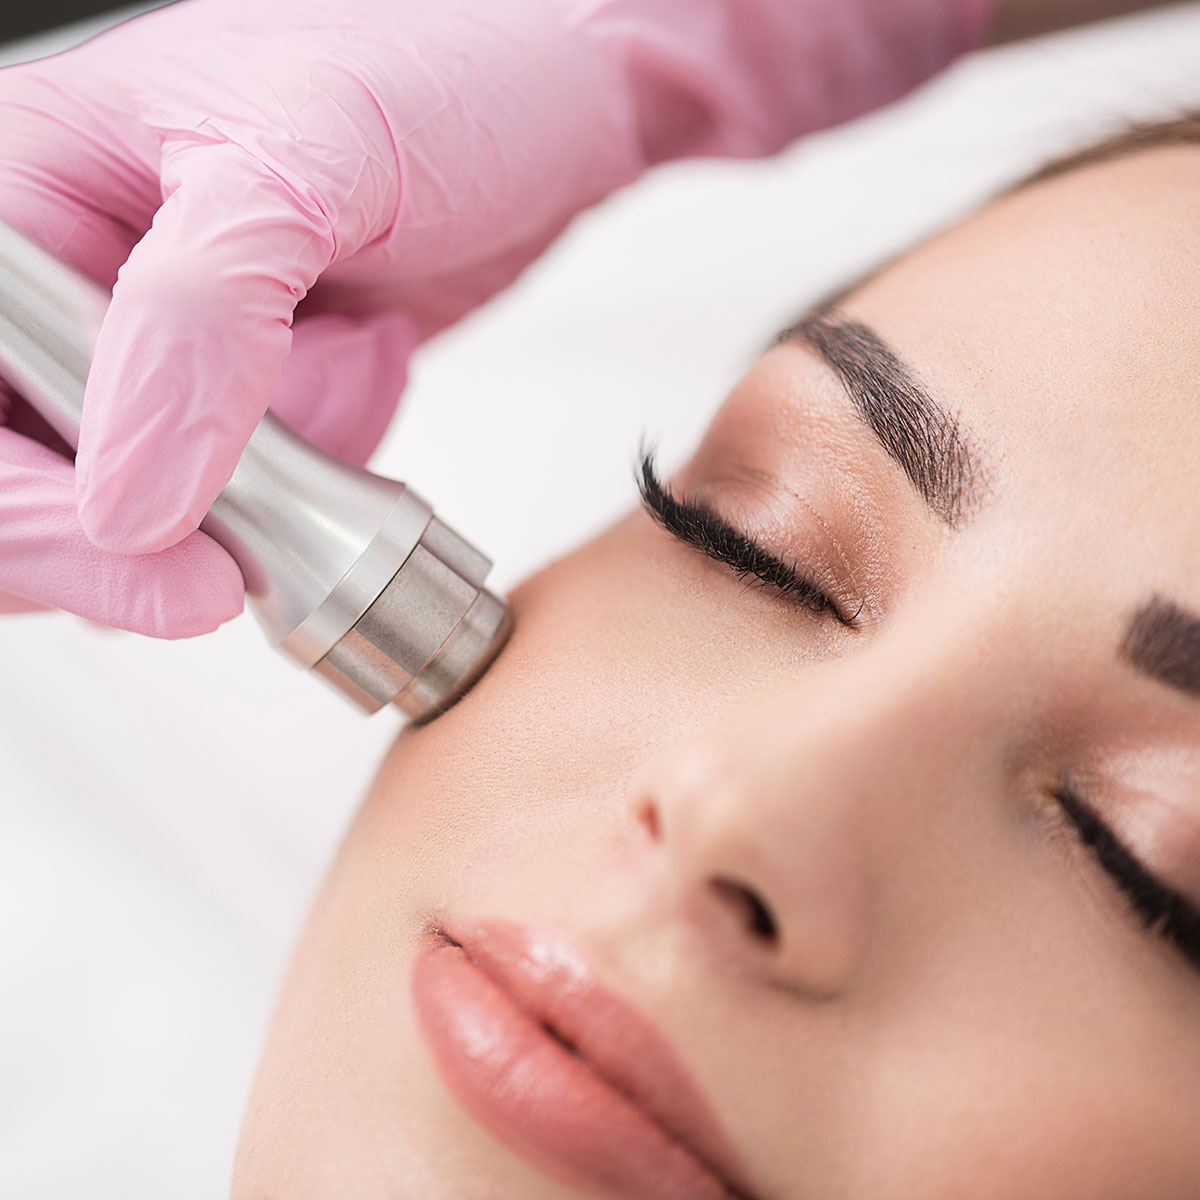 Woman getting treatment with injectable hyaluronic acid dermal filler